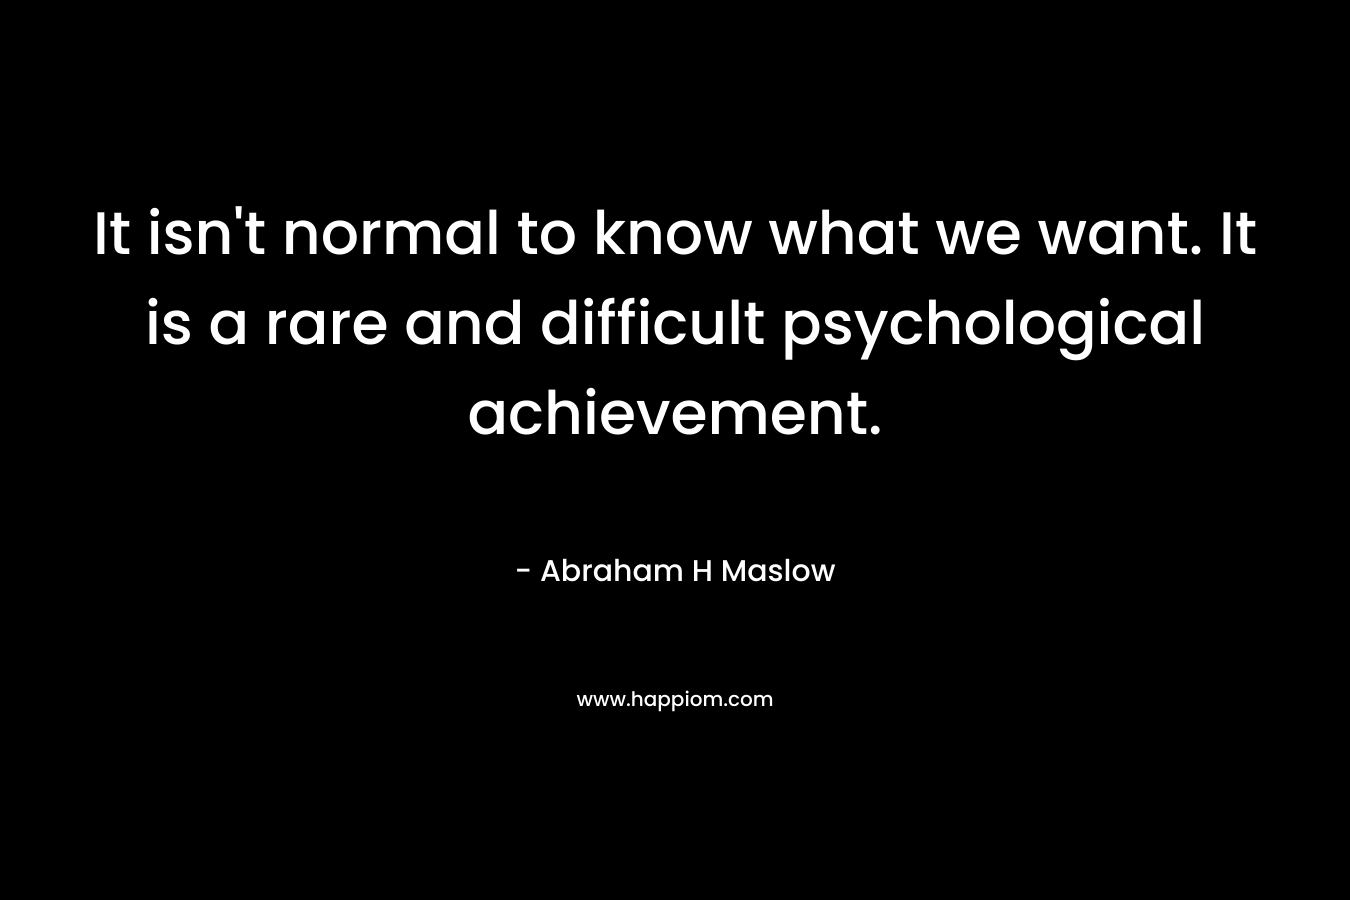 It isn’t normal to know what we want. It is a rare and difficult psychological achievement. – Abraham H Maslow